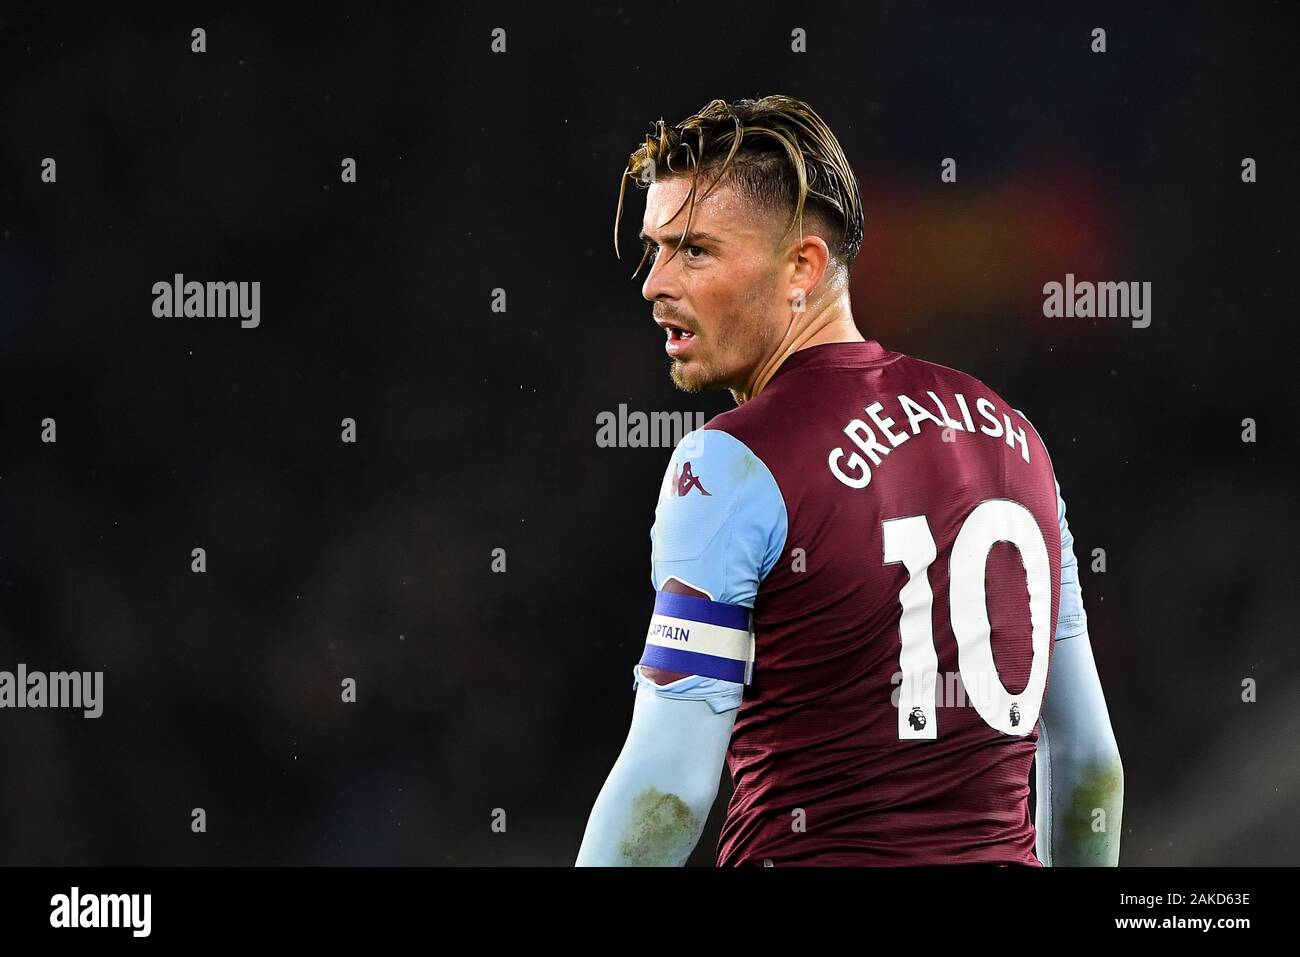 LEICESTER, ENGLAND - JANUARY 8TH Jack Grealish (10) of Aston Villa during the Carabao Cup Semi Final 1st Leg between Leicester City and Aston Villa at the King Power Stadium, Leicester on Wednesday 8th January 2020. (Credit: Jon Hobley | MI News) Photograph may only be used for newspaper and/or magazine editorial purposes, license required for commercial use Credit: MI News & Sport /Alamy Live News Stock Photo